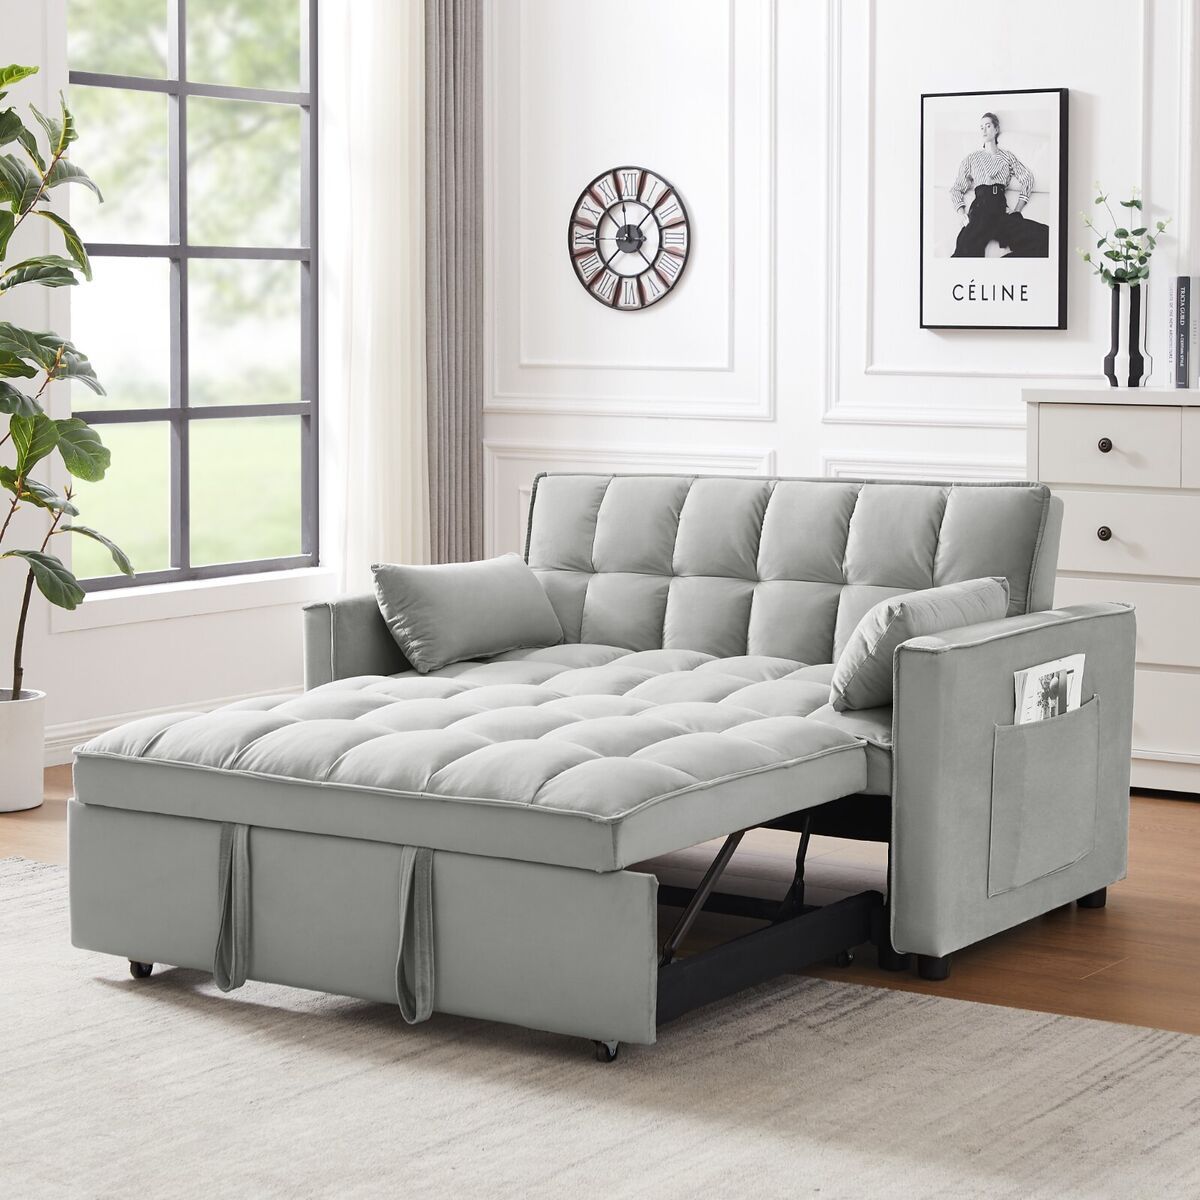 55" Convertible Sofa Bed Velvet Sleeper Loveseat Sofa Pull Out Bed W Pocket  Gray | Ebay With Convertible Gray Loveseat Sleepers (View 8 of 15)